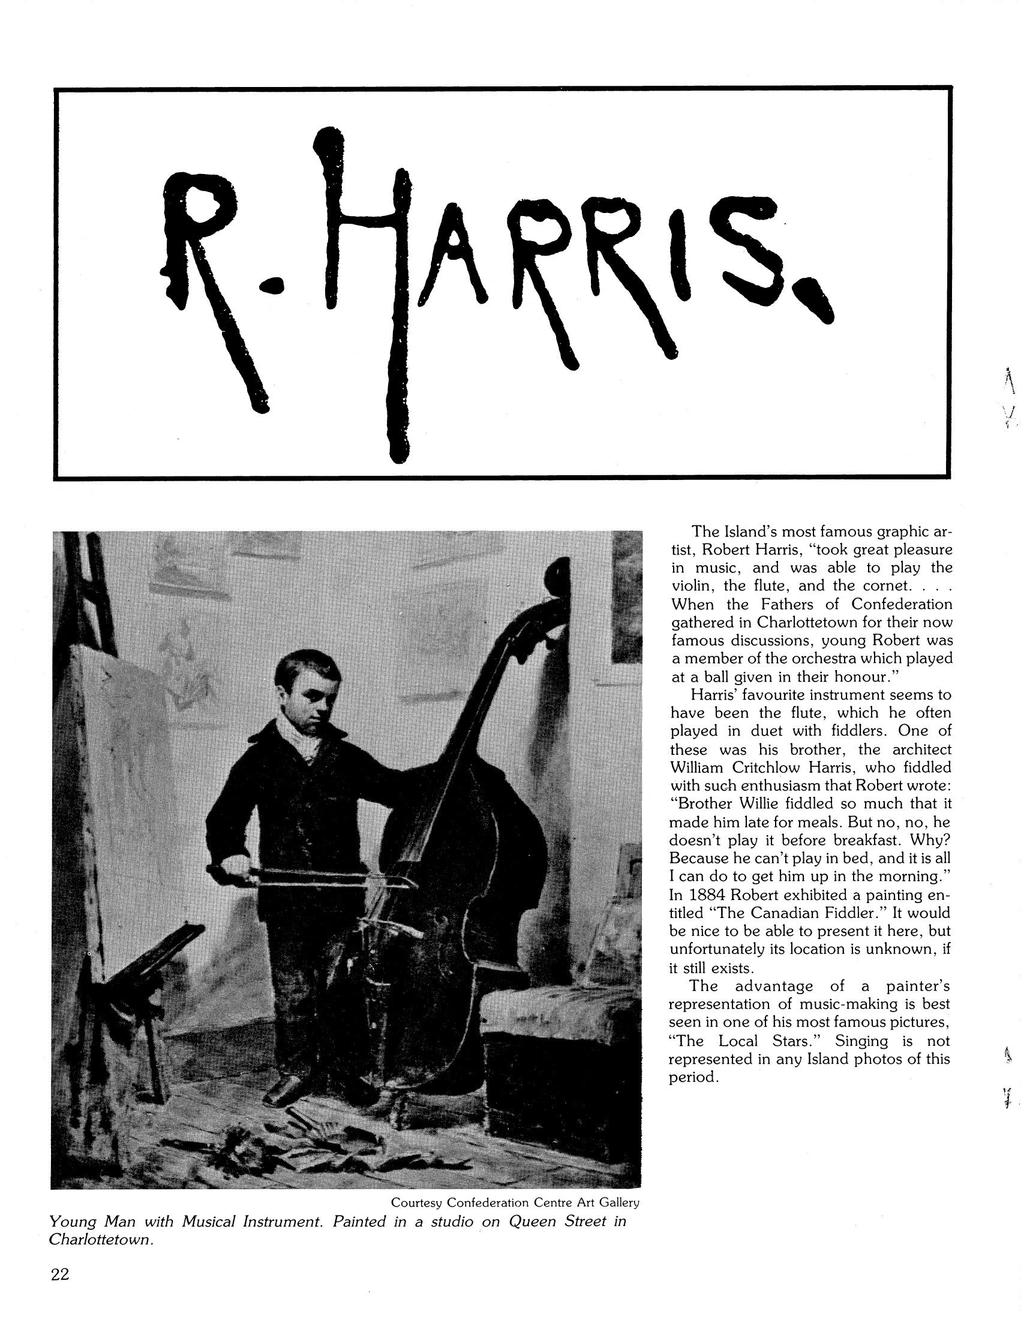 The Island's most famous graphic artist, Robert Harris, "took great pleasure in music, and was able to play the violin, the flute, and the cornet.